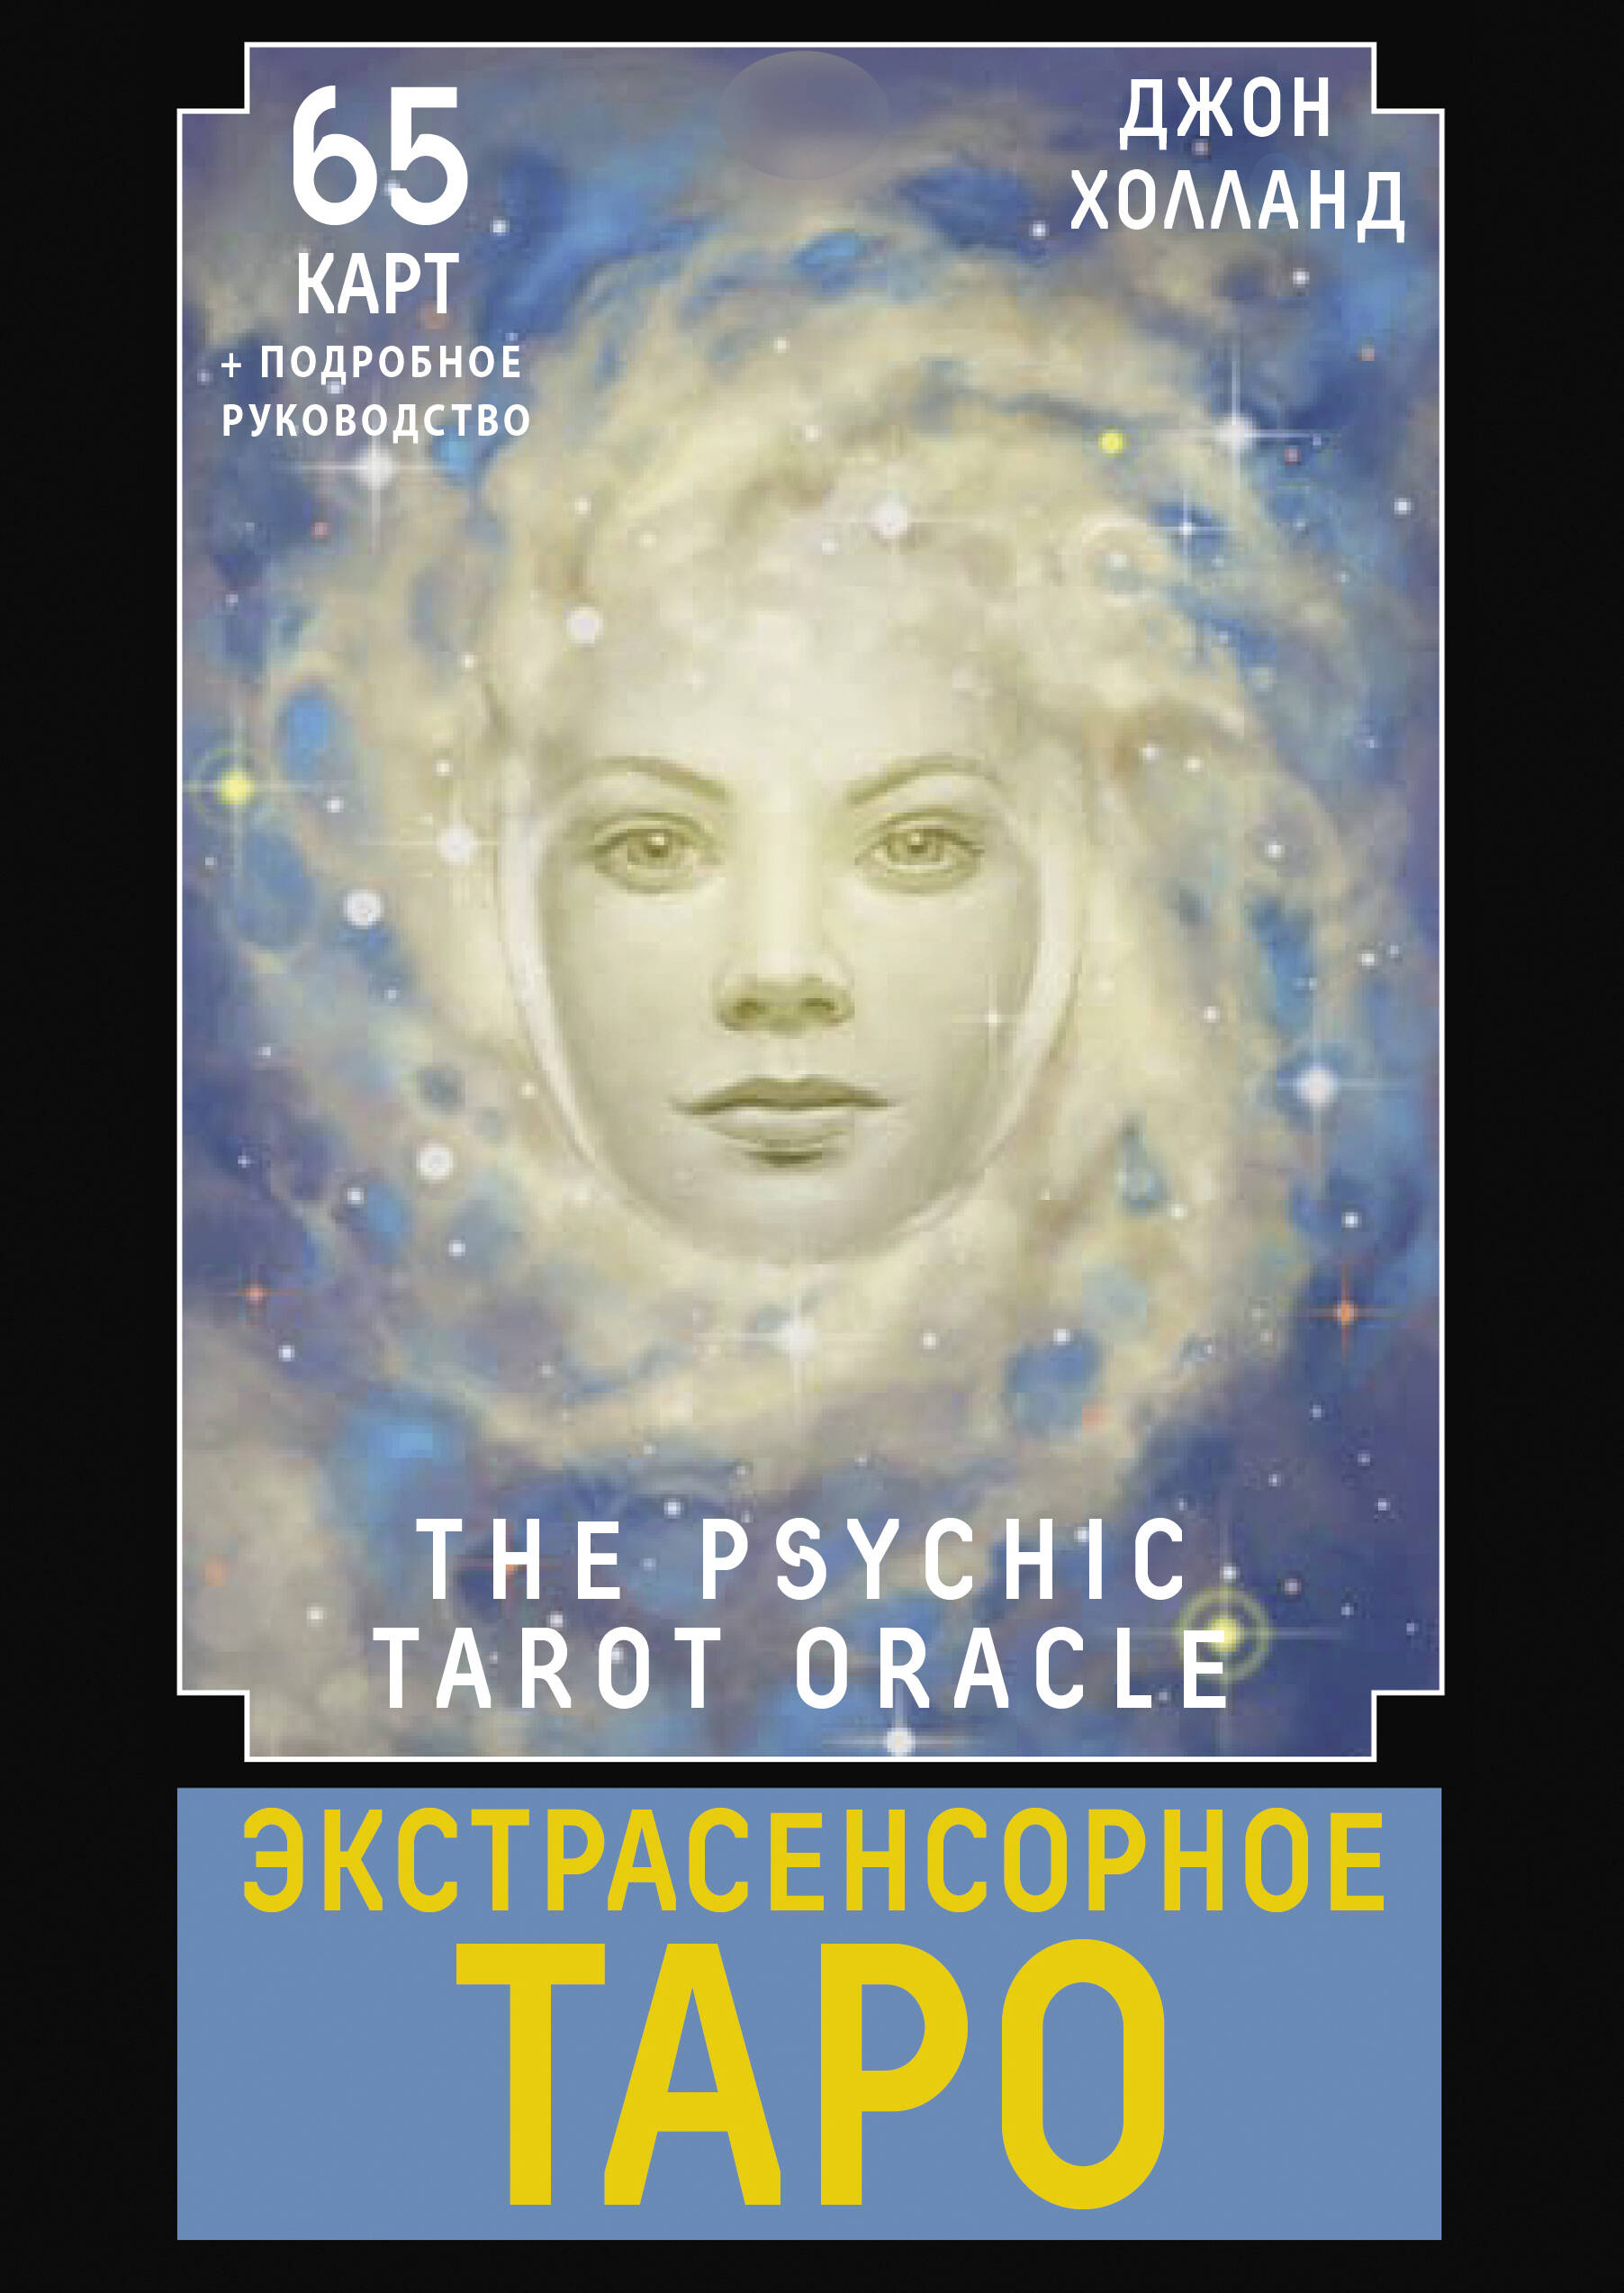  . The Psychic Tarot Oracle. 65  +  